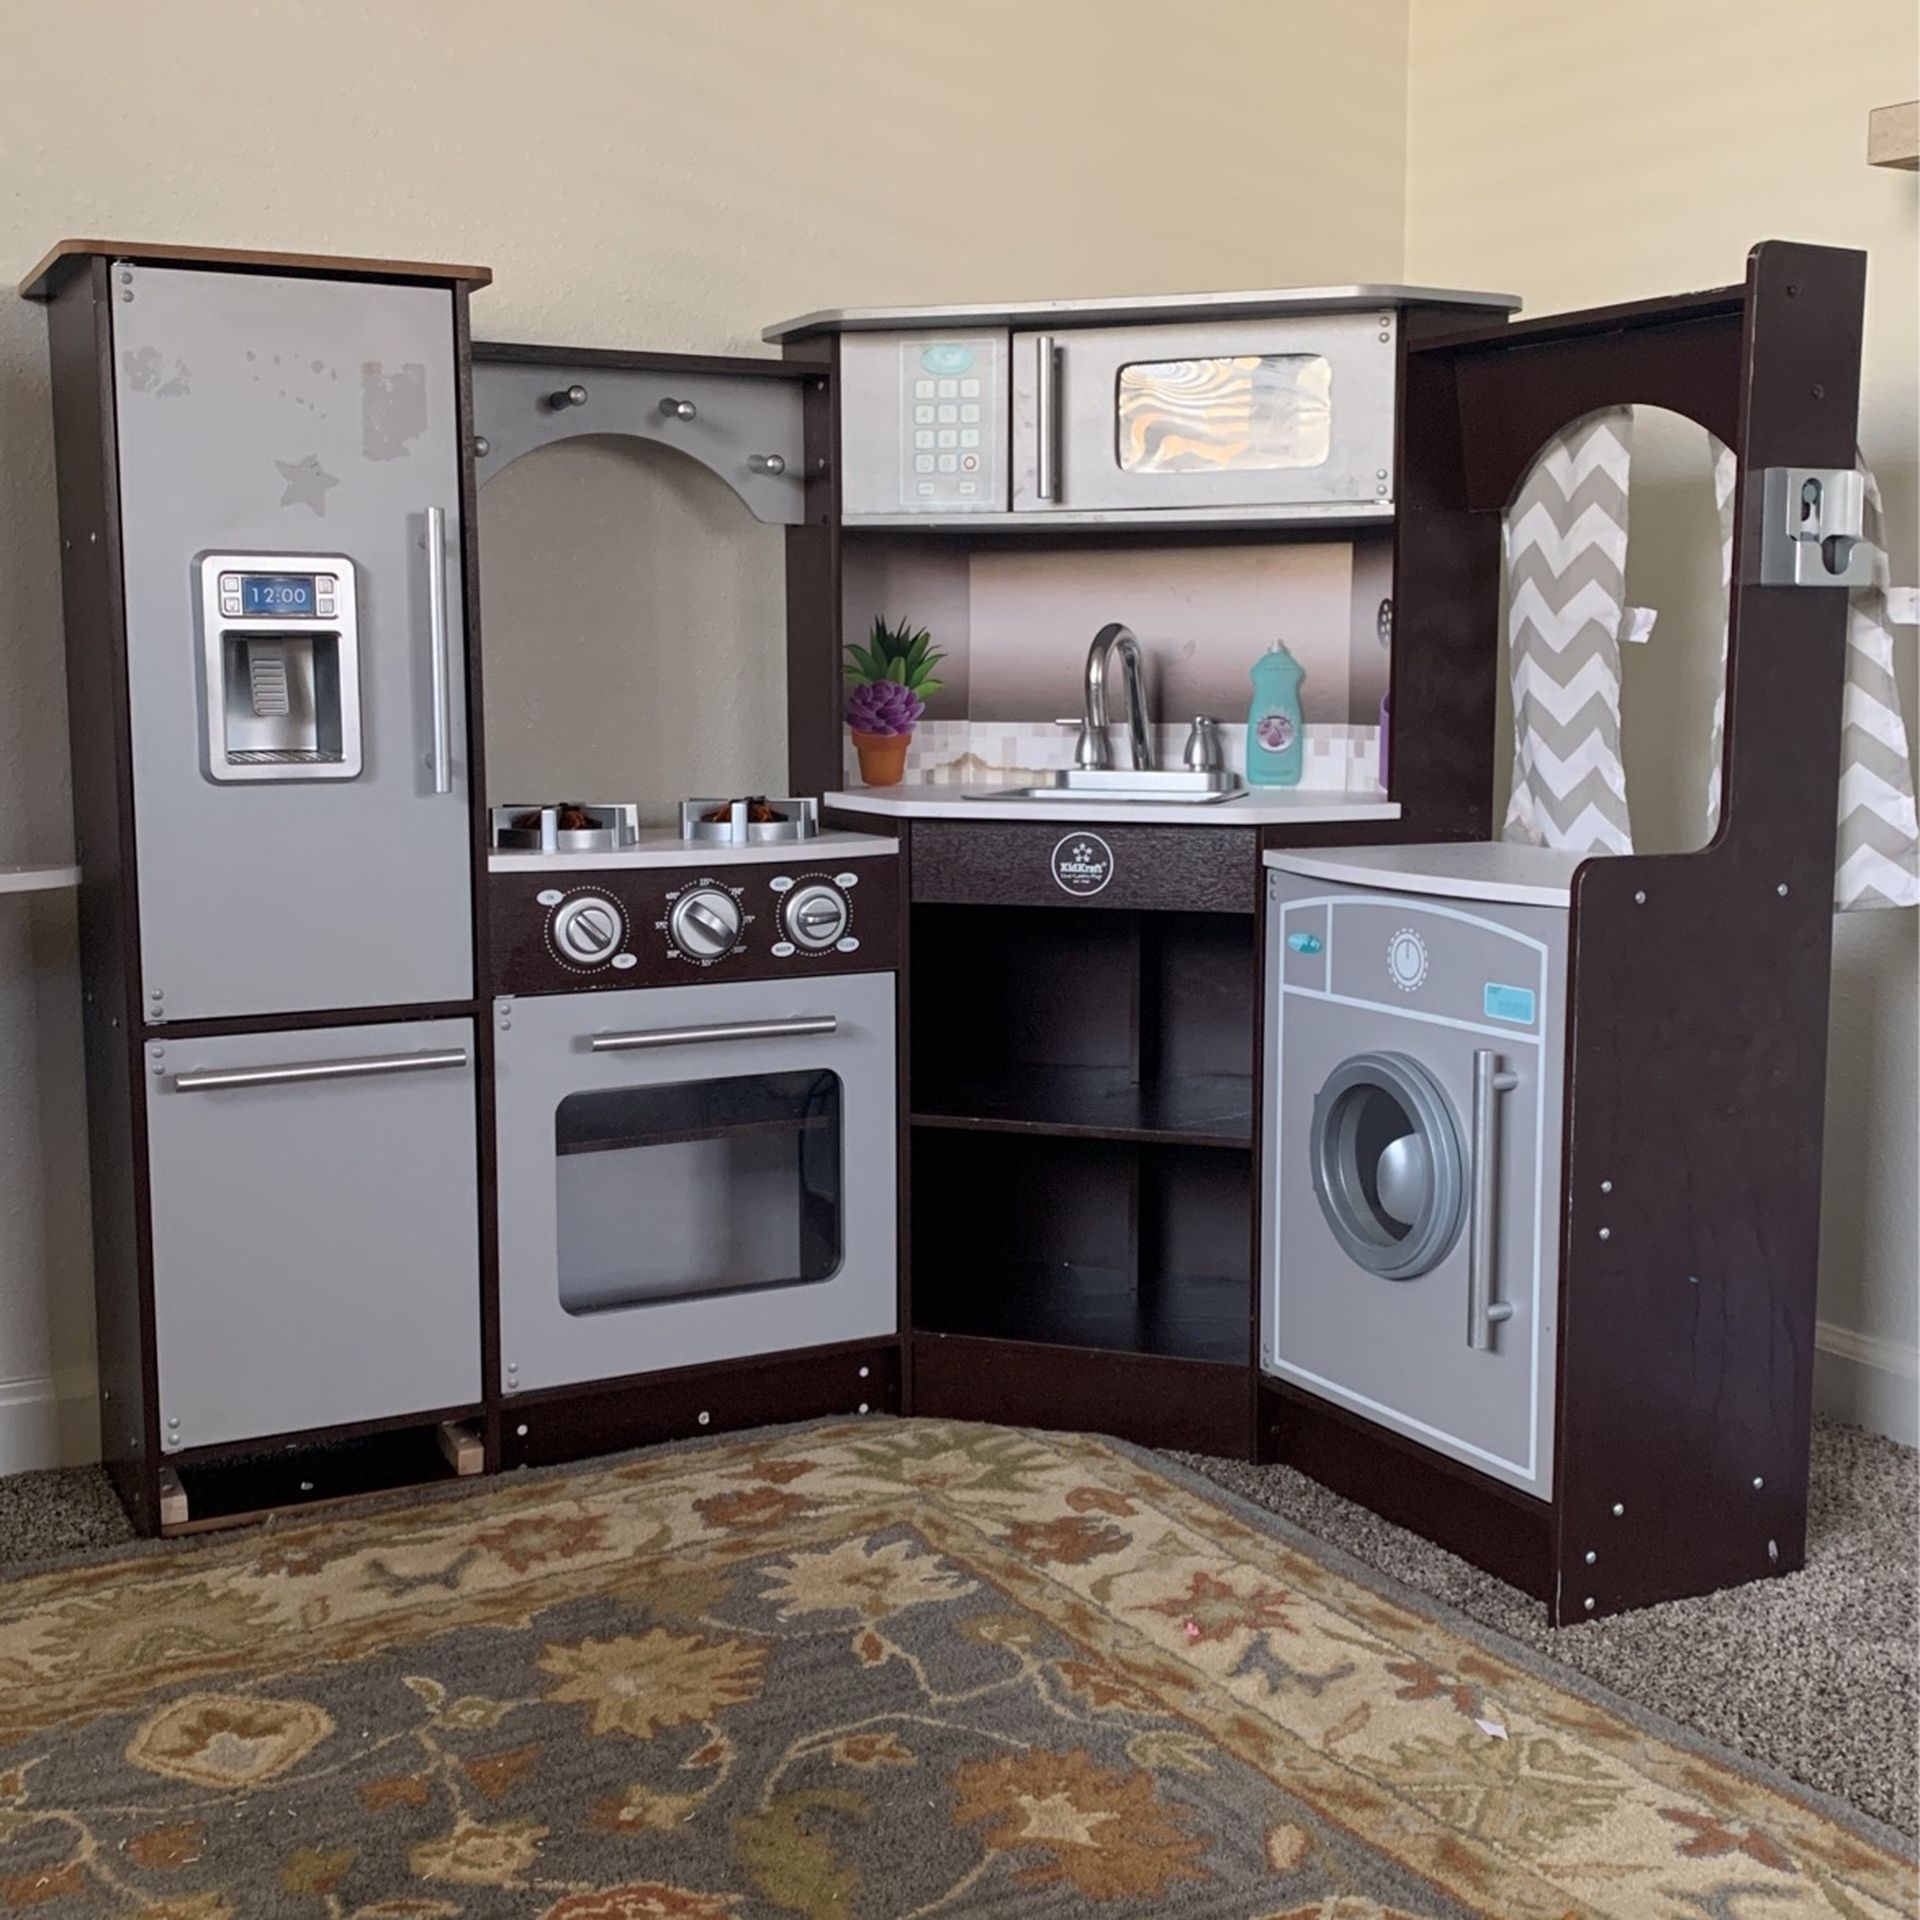 Kids Kitchen, Washer And Dryer + Various Pretend Food